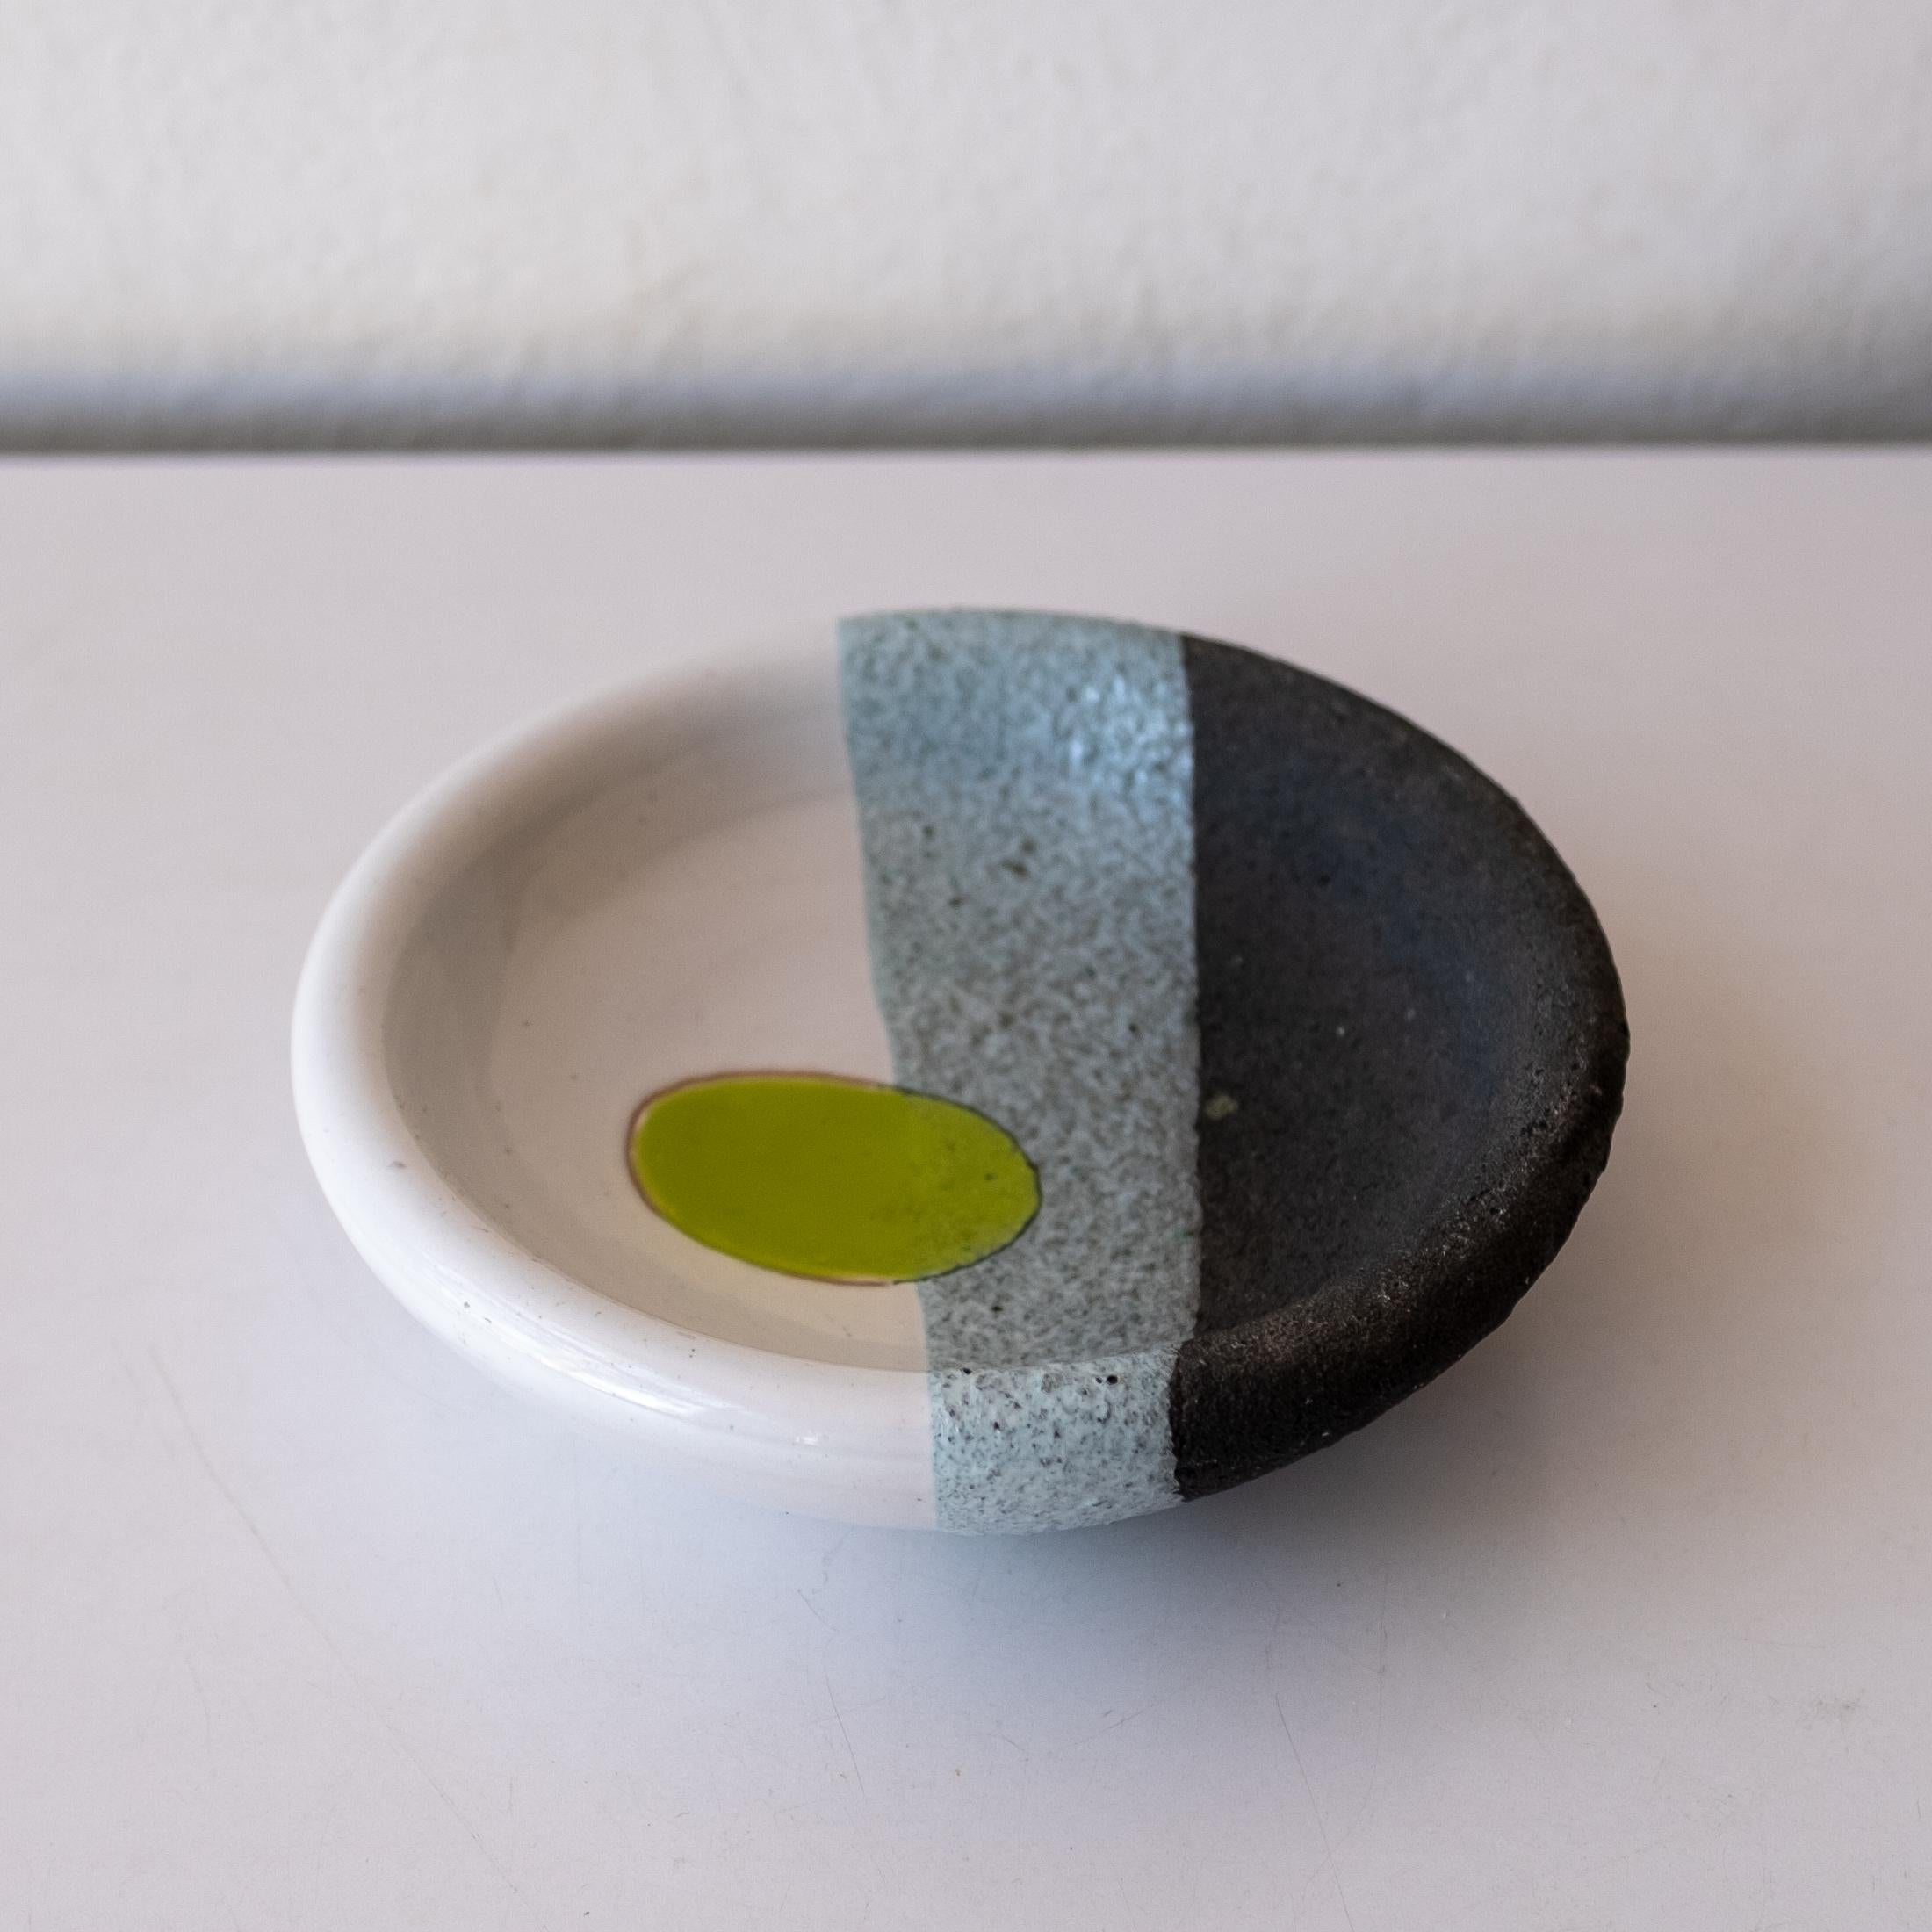 Ettore Sottsass for Bitossi ceramic bowl with lava glaze. It is part of a limited edition commissioned by the Dutch department store ‘De Bijenkorf’ and manufactured by Bitossi. Italy, 1958.